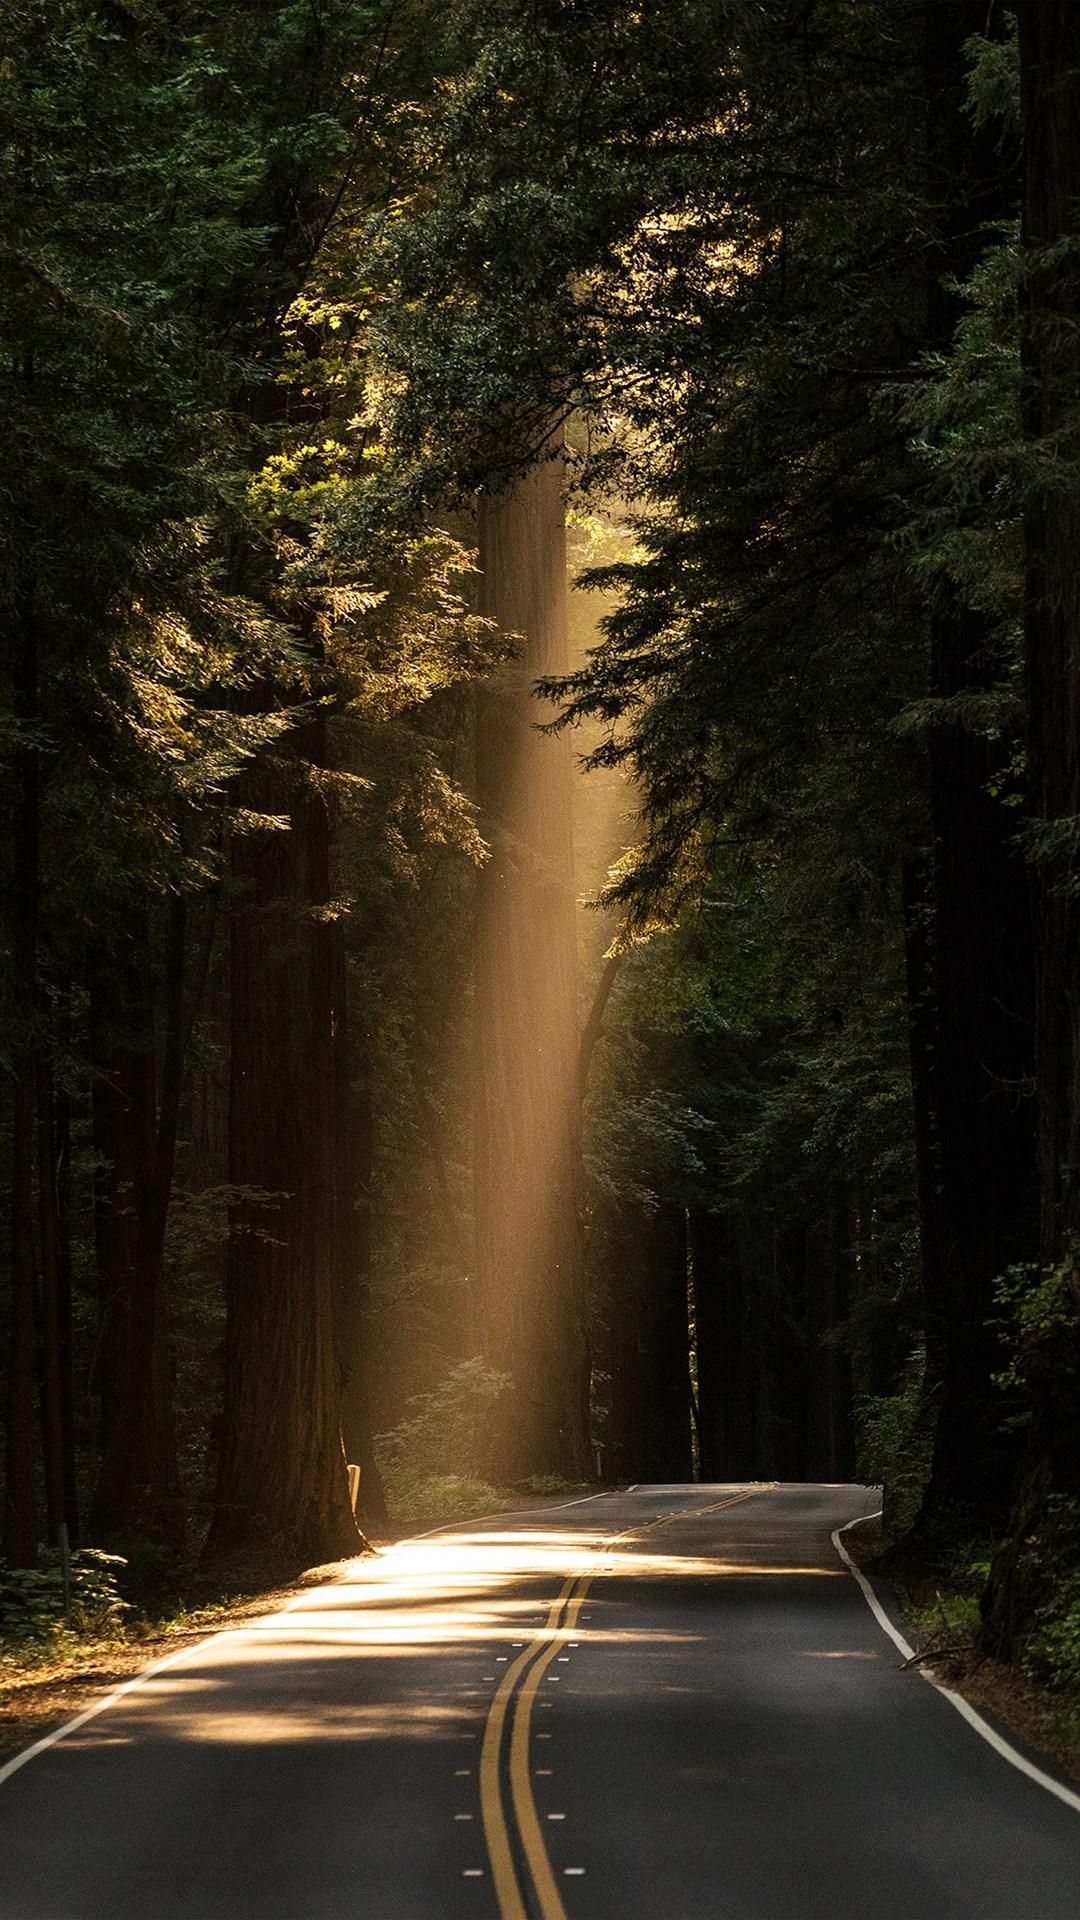 Light road forest iPhone 8 Wallpaper Download. iPhone Wallpaper